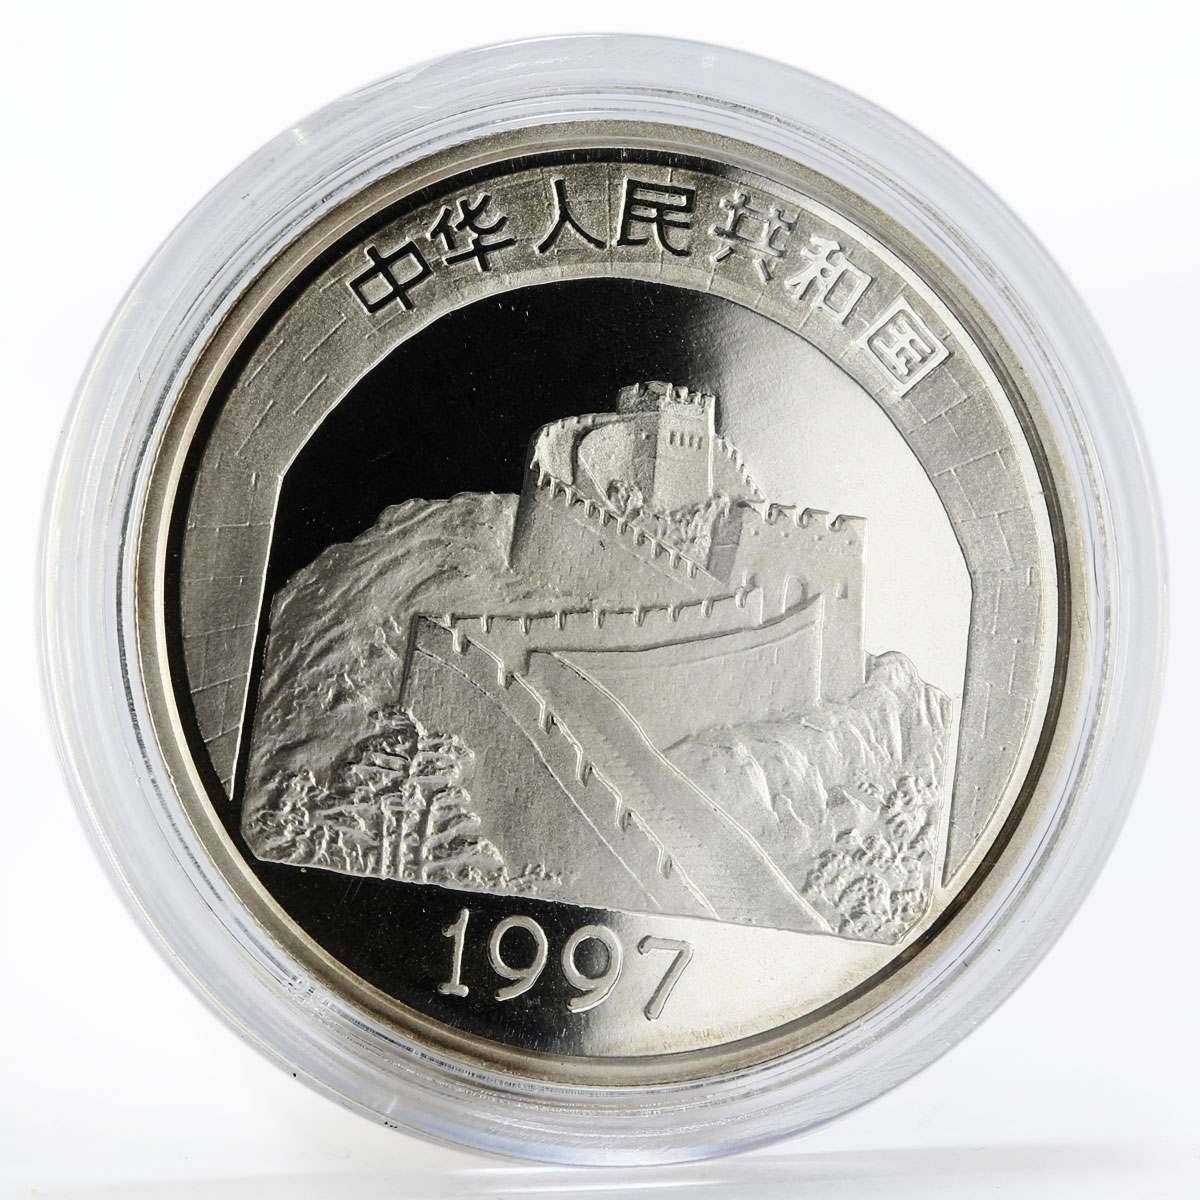 China 5 yuan Building Great Wall silver proof coin 1997